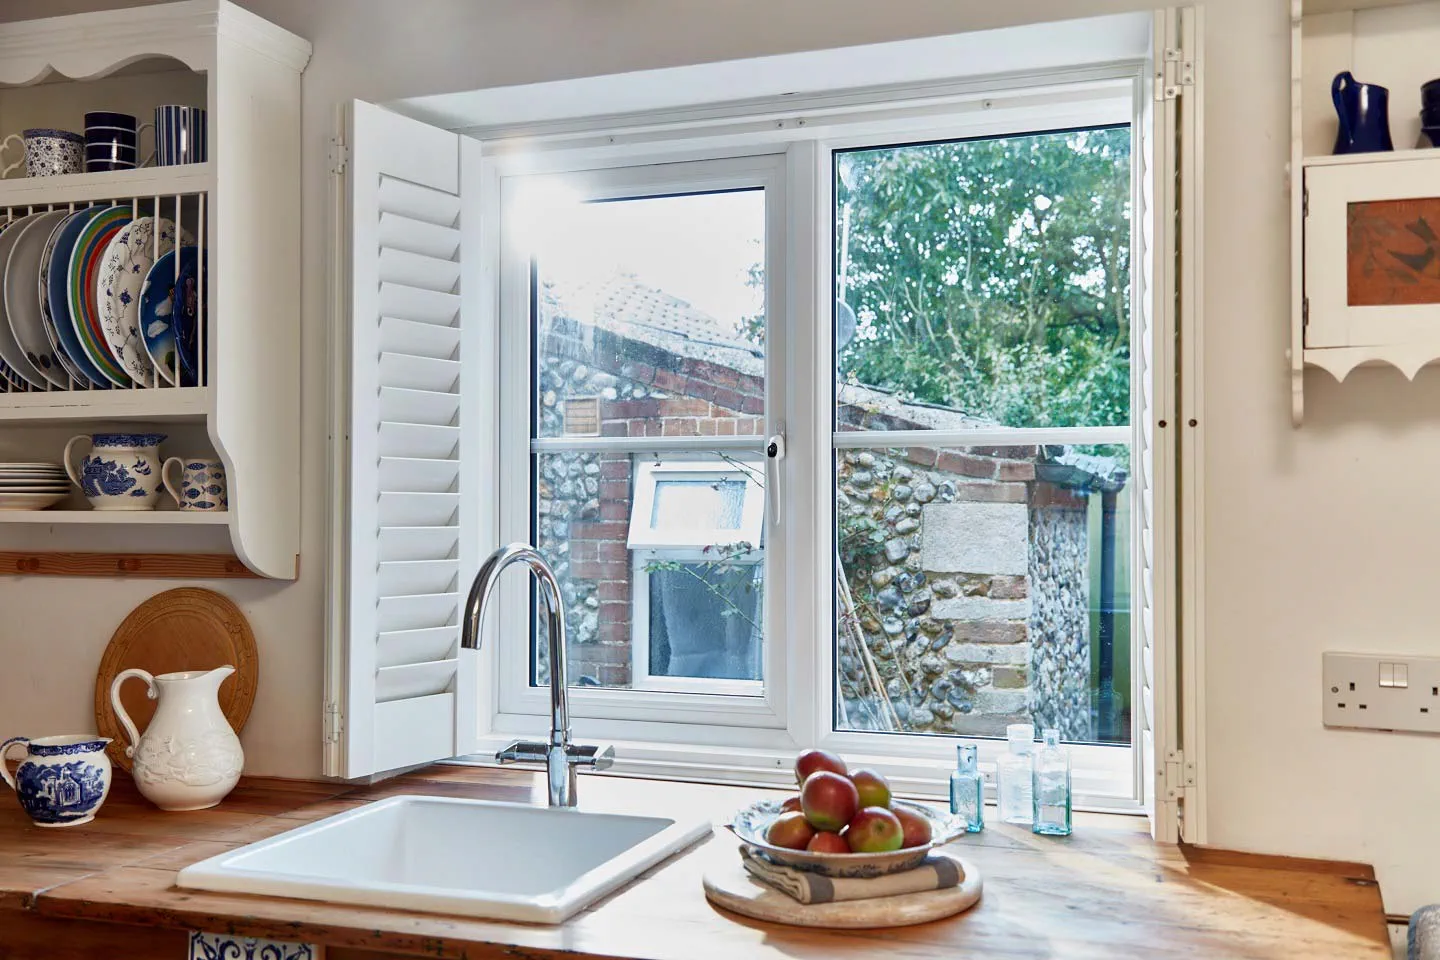 White uPVC kitchen window with wooden blinds design inspiration from Anglian Home Improvements